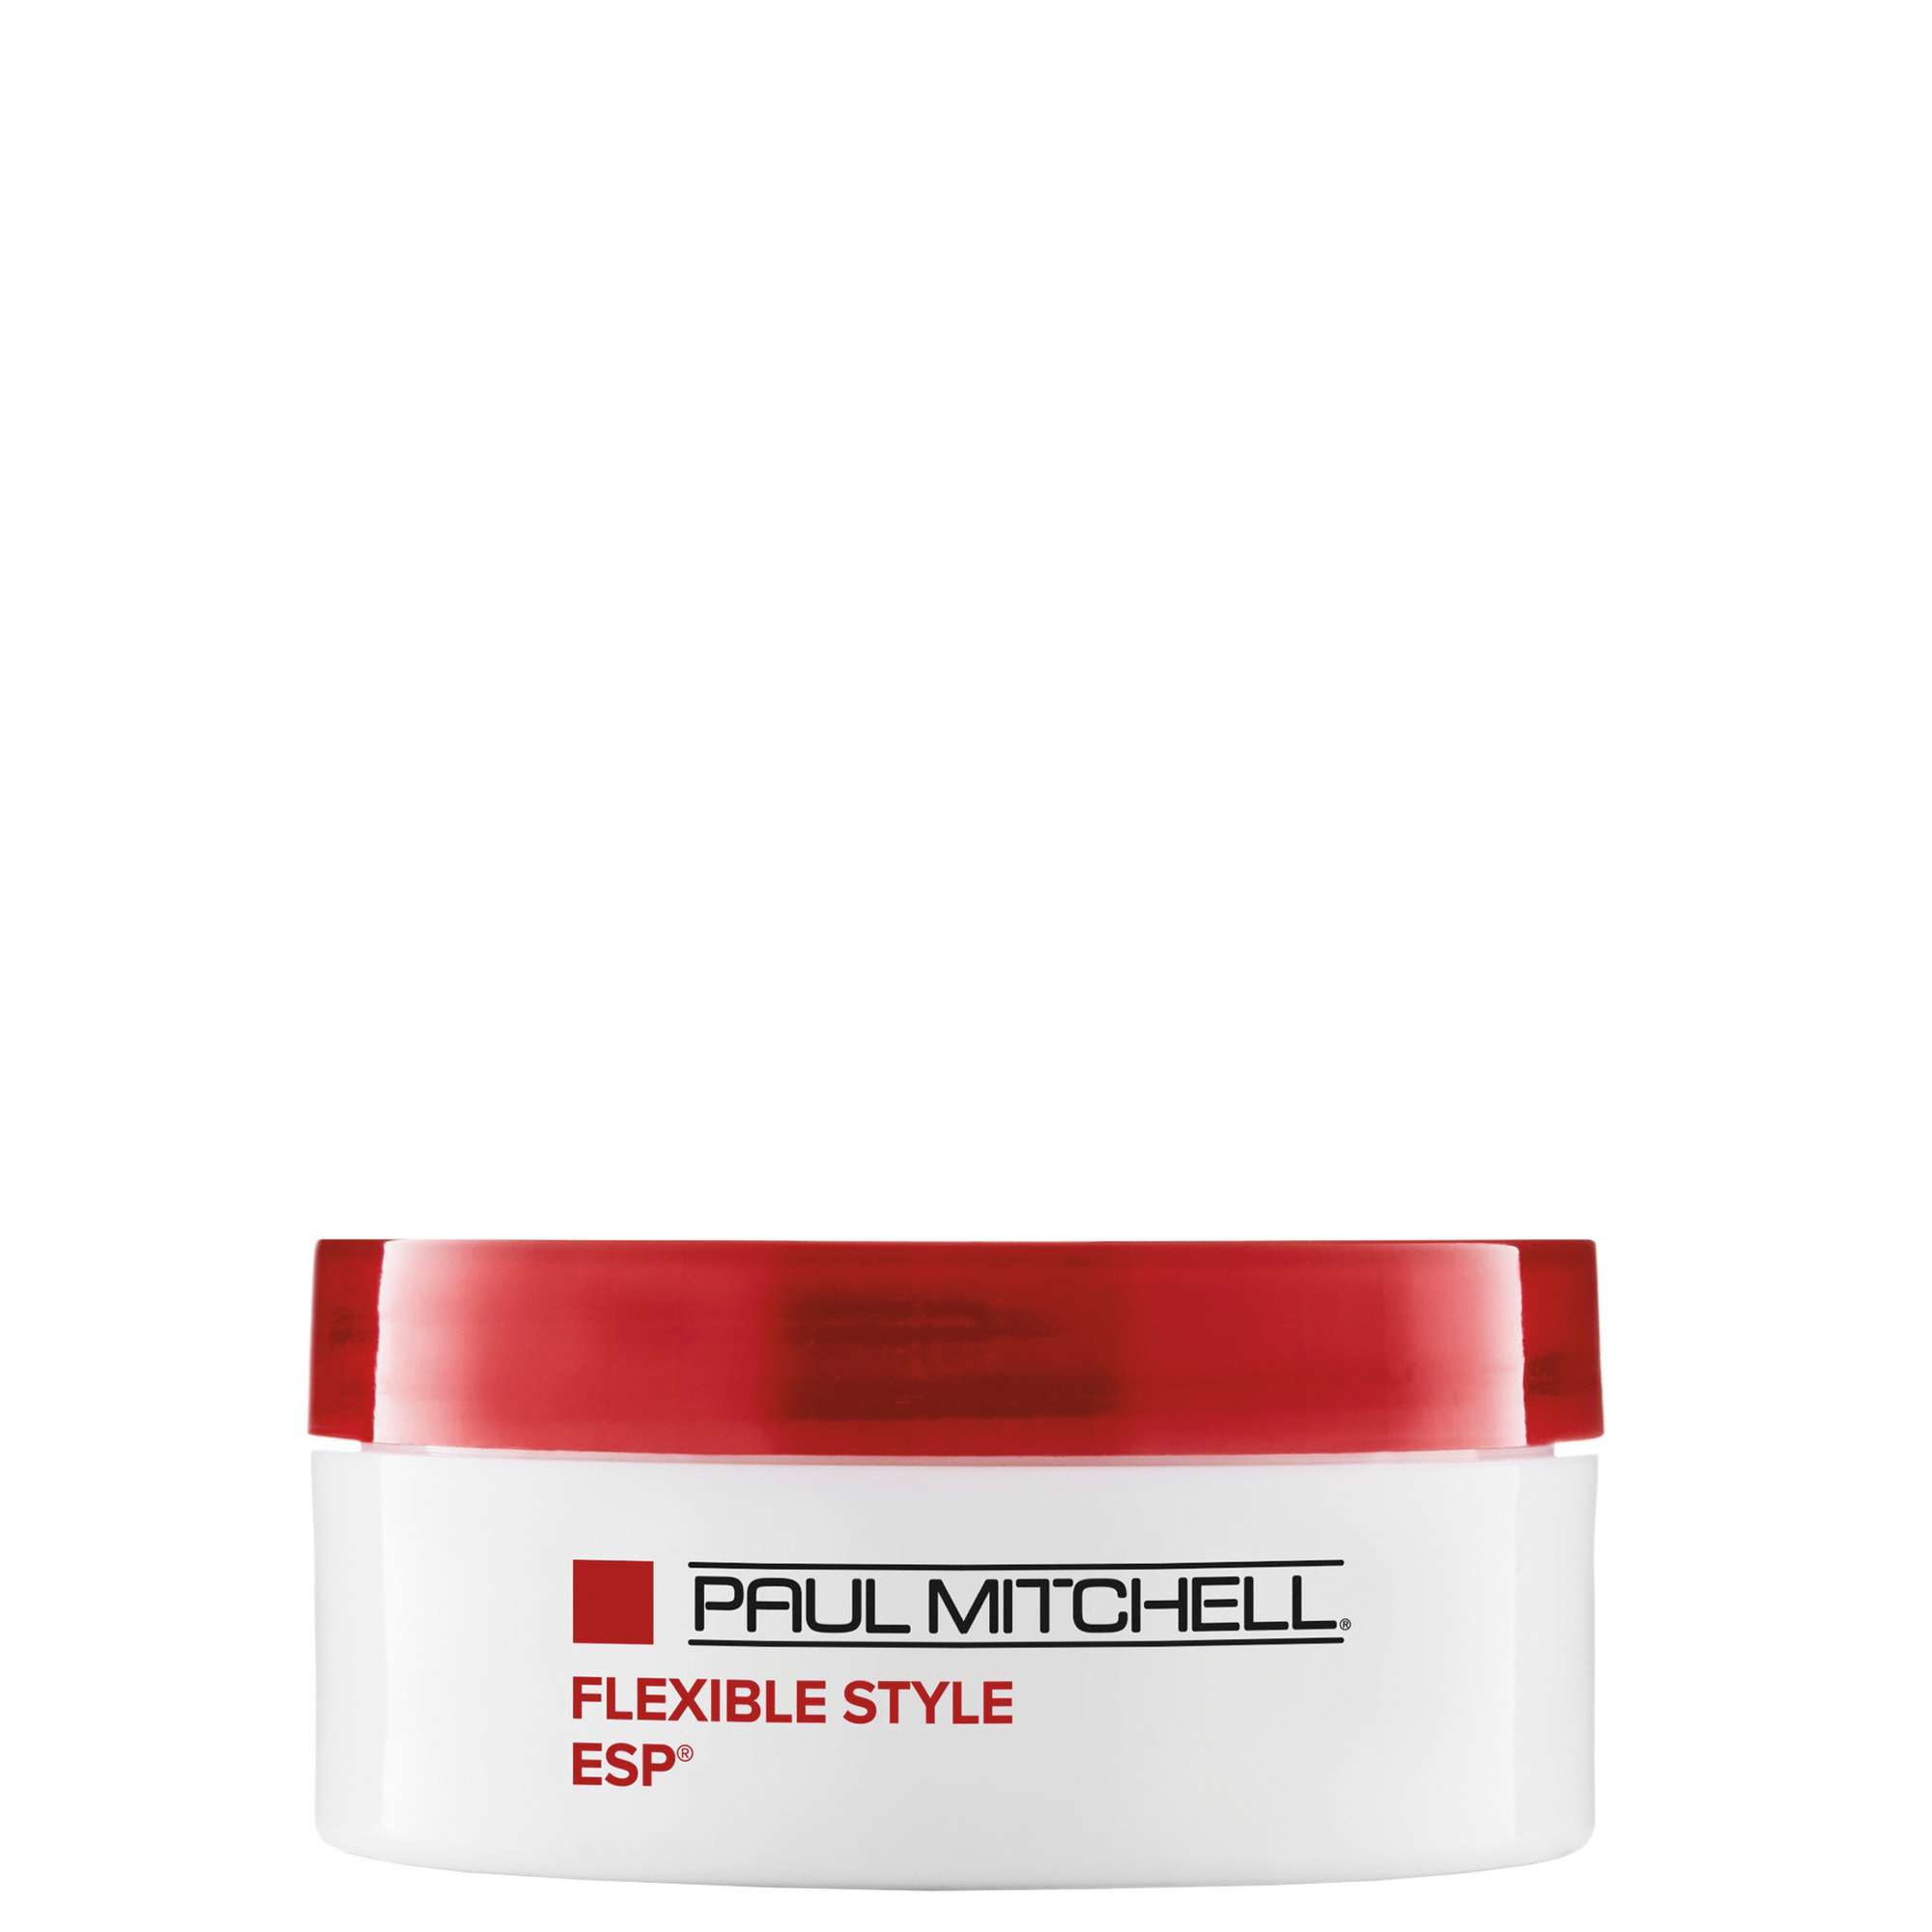 Photos - Hair Product Paul Mitchell Flexible Style ESP Elastic Shaping Paste 50g 